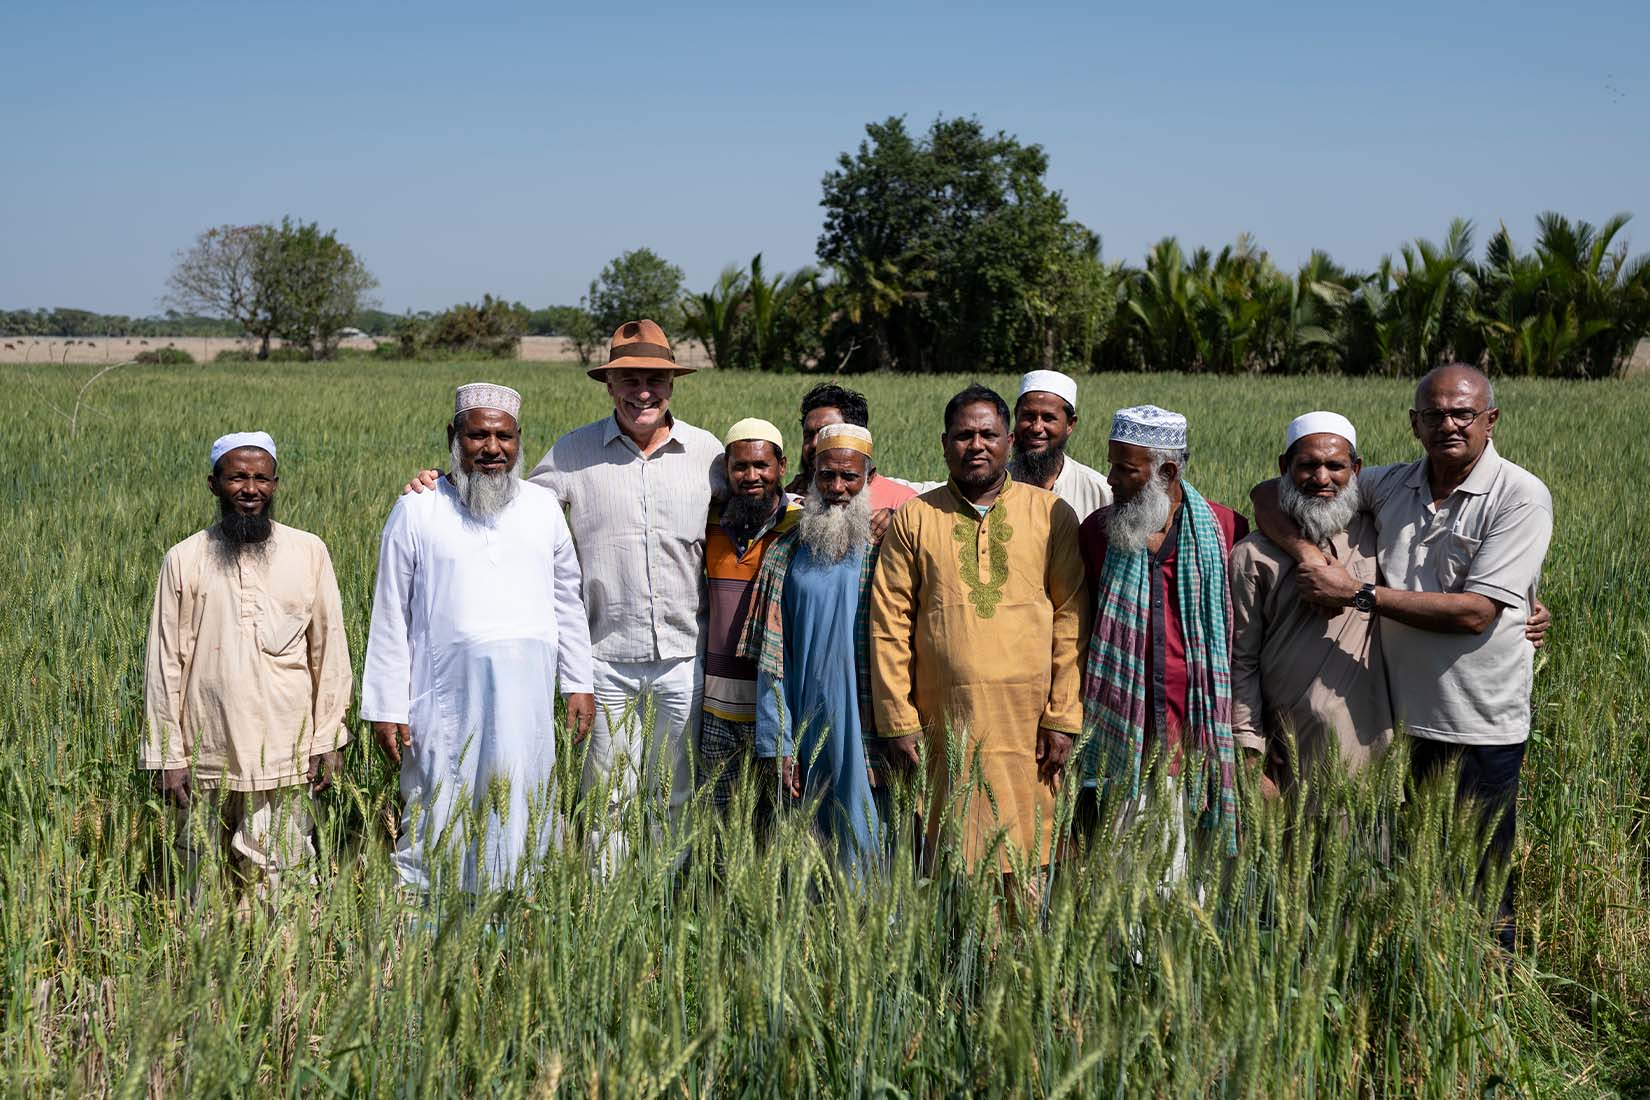 A group of men smiling at the camera in a field.